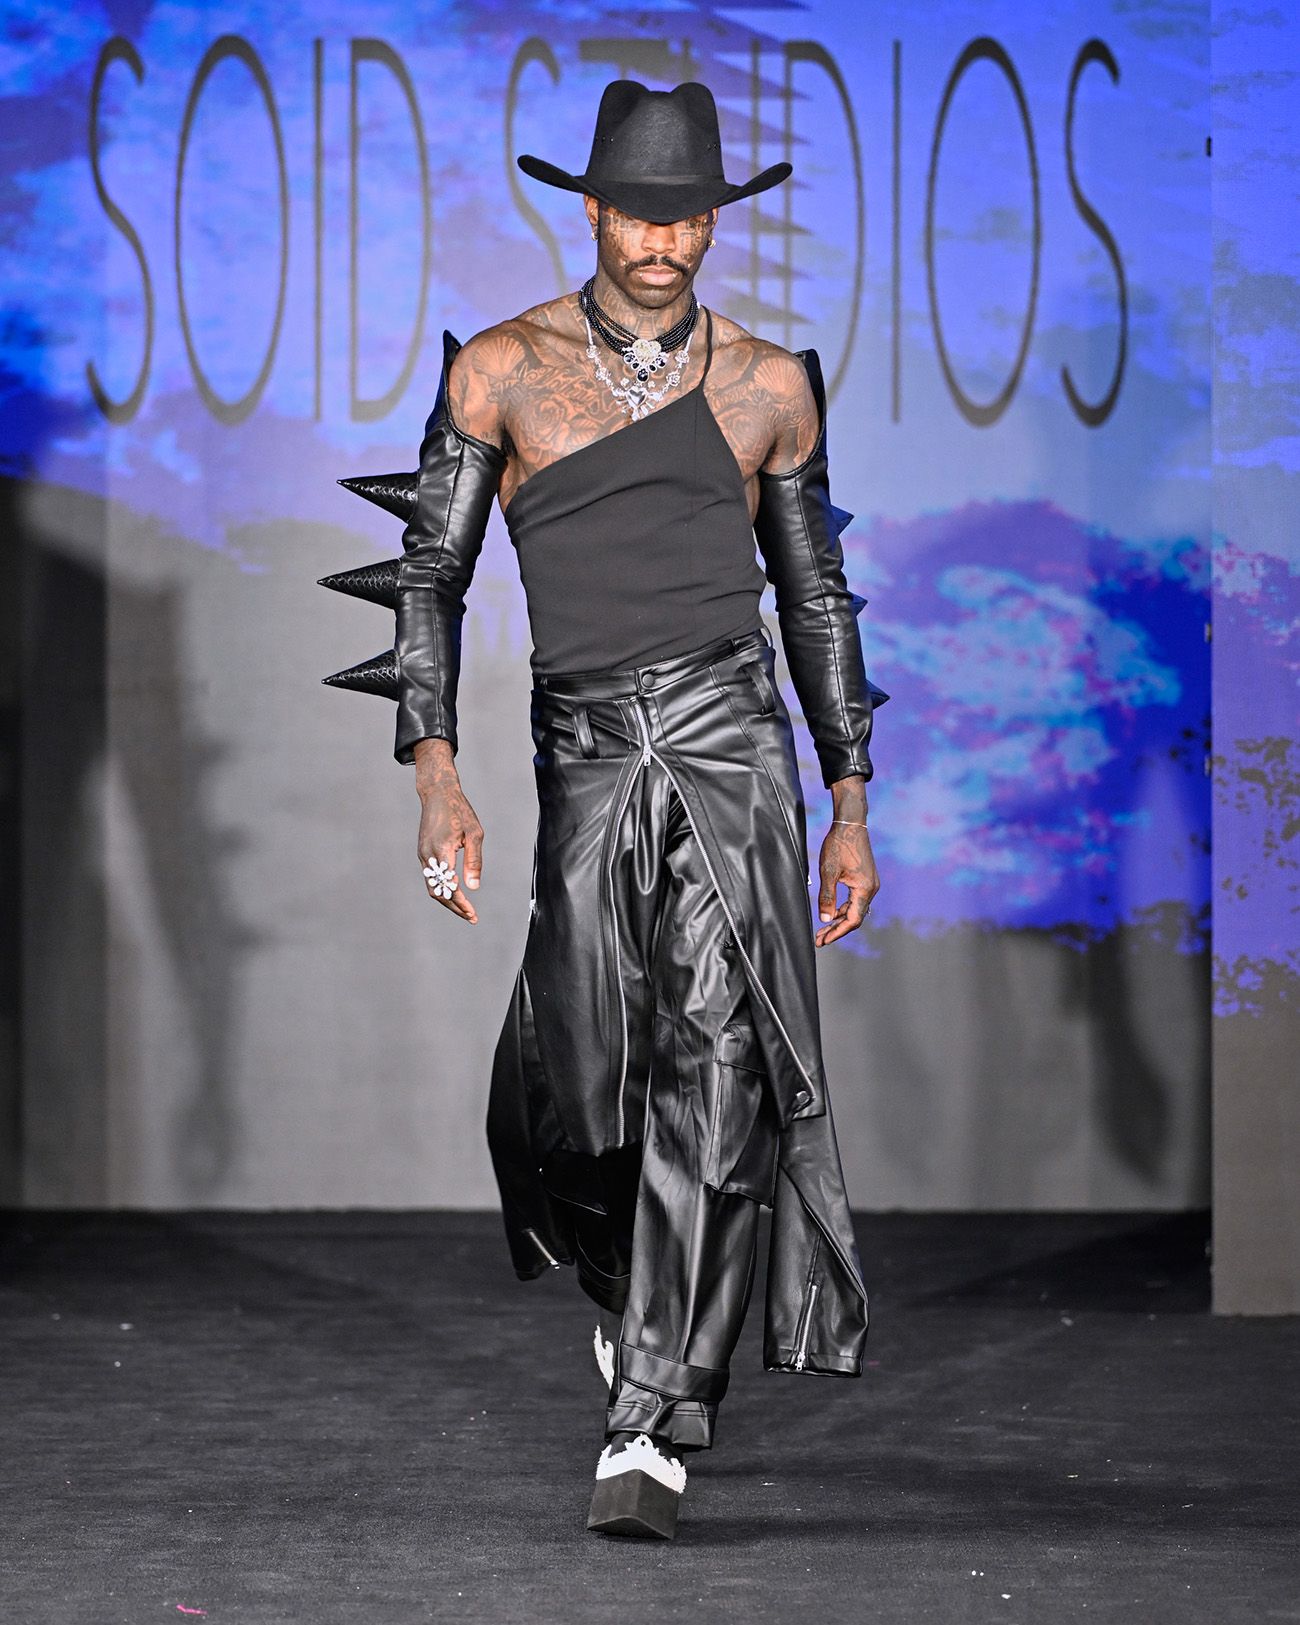 NEW YORK, NEW YORK - FEBRUARY 08: Yves Mathieu-East walks during the Soid Studios fashion show at New York Fashion Week Fall 2024 powered by Art Hearts Fashion at The Angel Orensanz Foundation on February 08, 2024 in New York City. (Photo by Arun Nevader/Getty Images for Art Hearts Fashion)